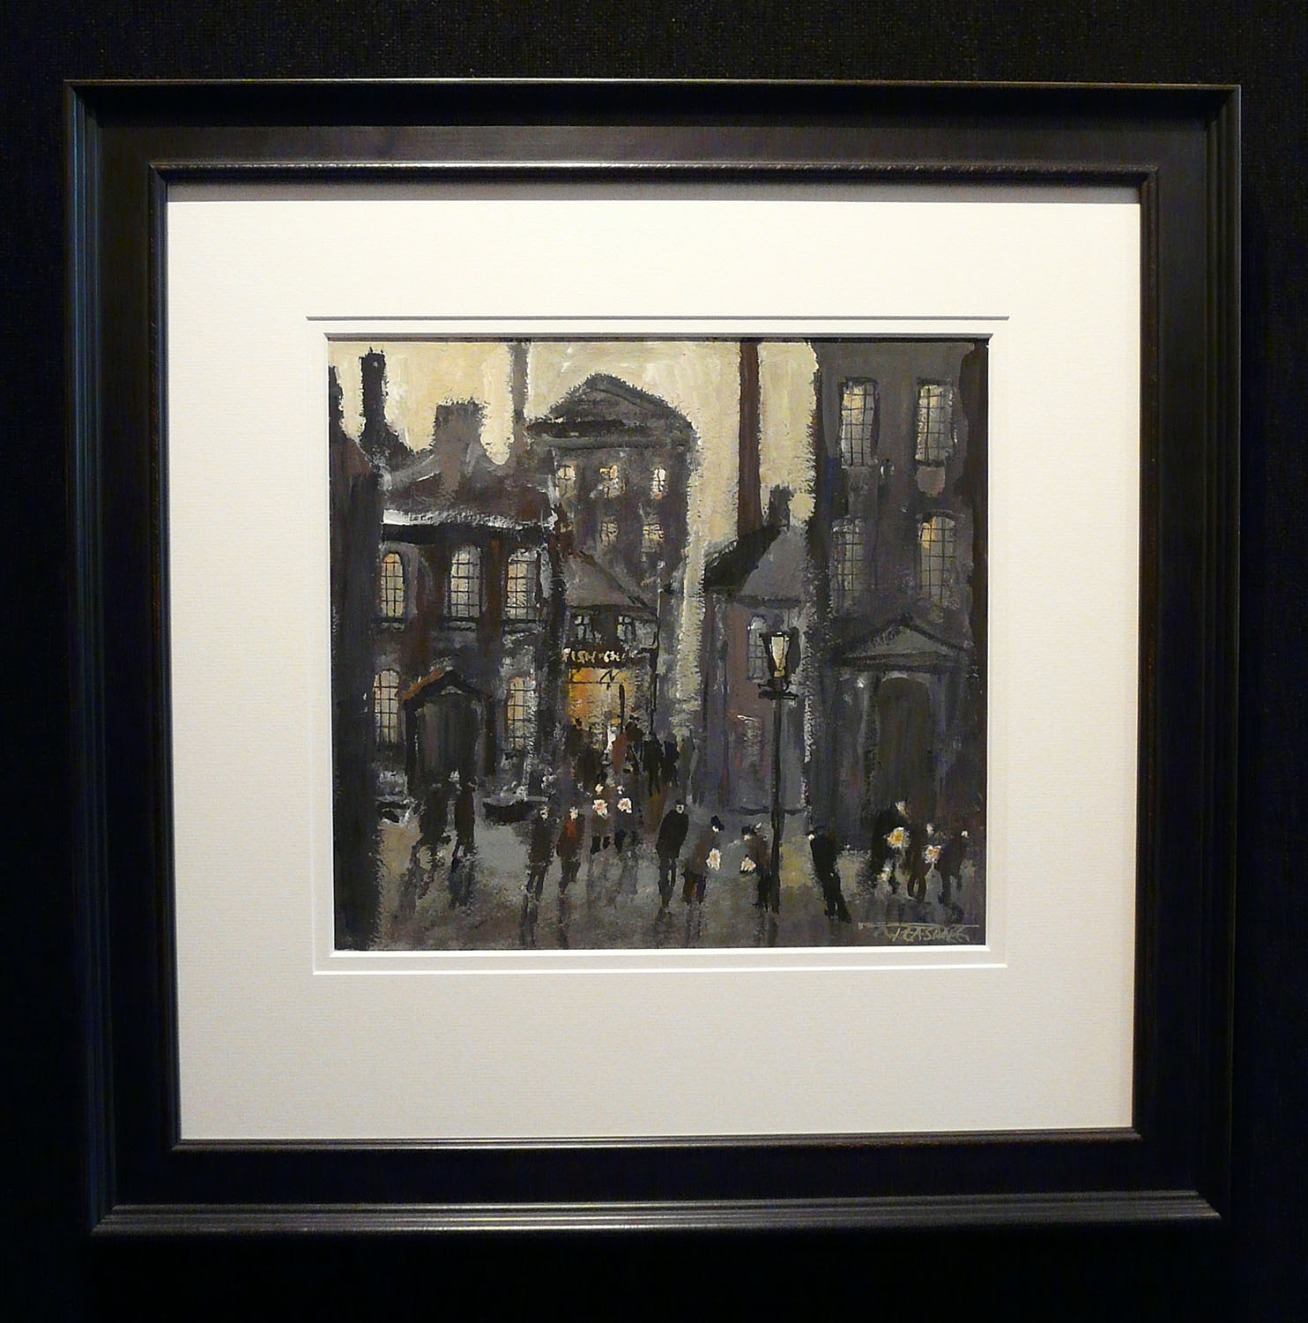 The Chip Shop by Malcolm Teasdale